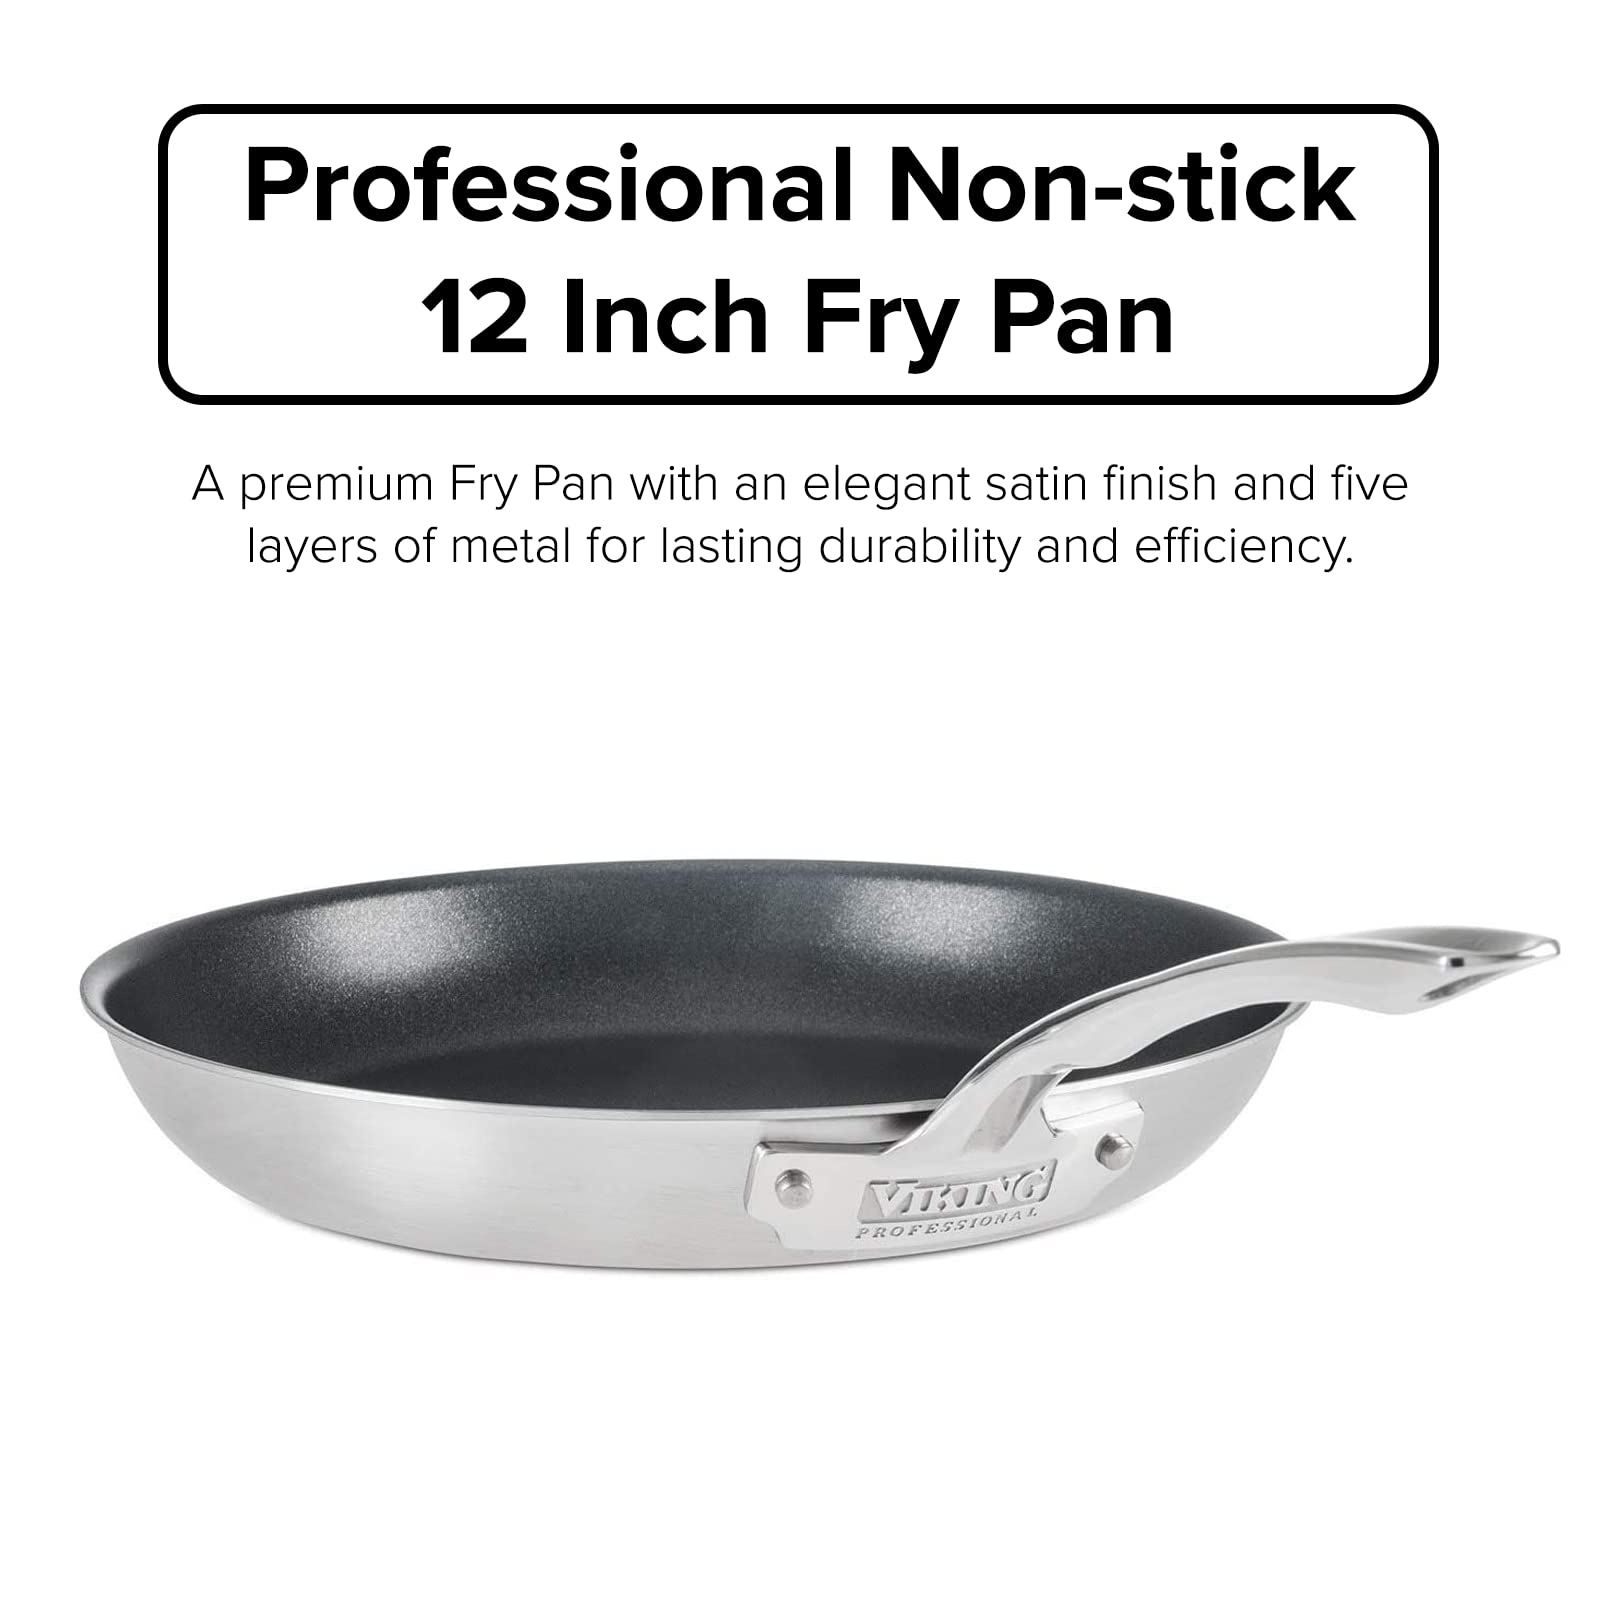 Viking Culinary Professional 5-Ply Nonstick Fry Pan, 12 inch, Dishwasher, Oven Safe, Works on All Cooktops including Induction